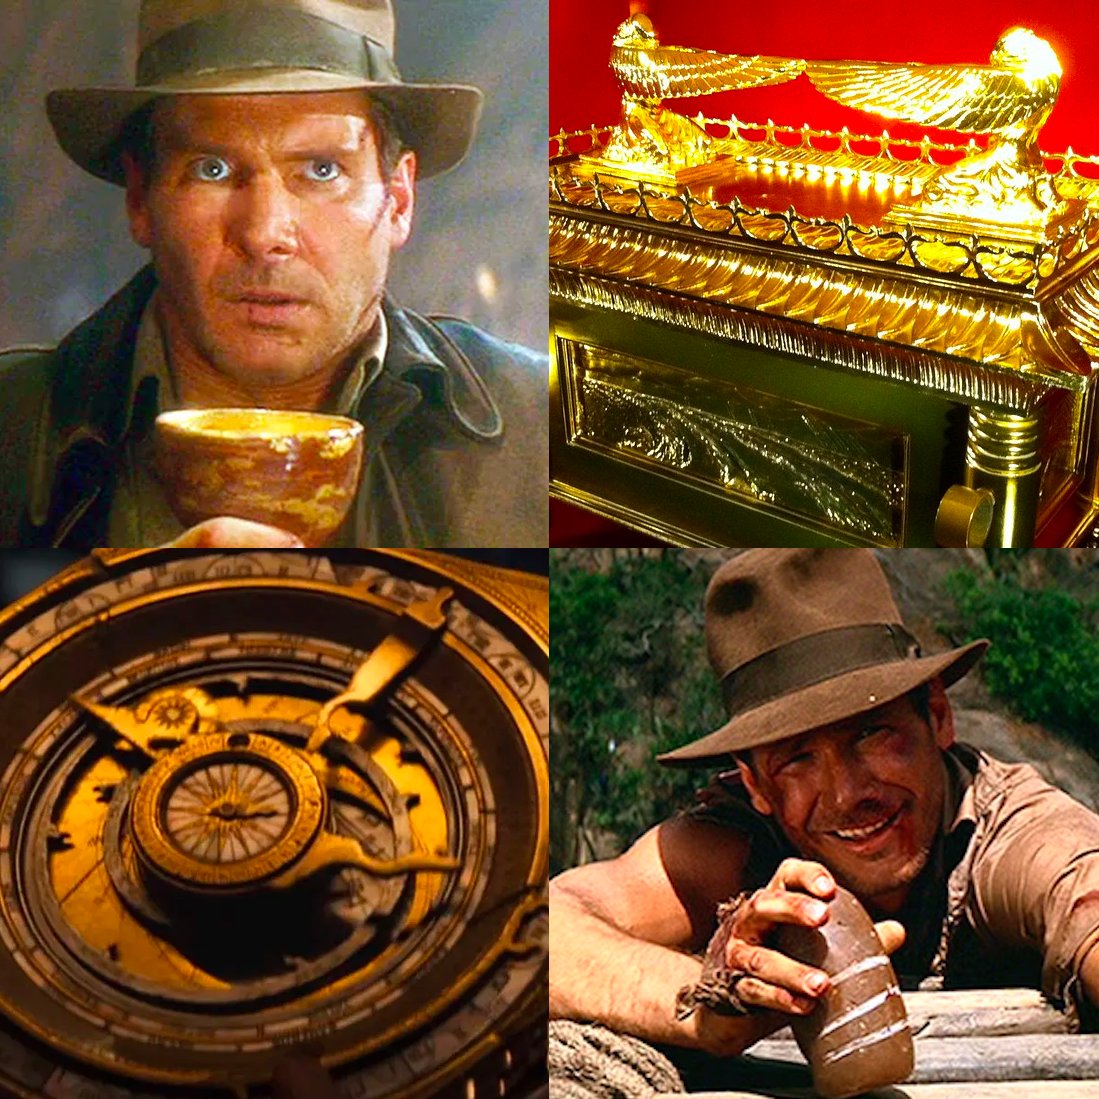 Do you have a favorite Indy MacGuffin...but more importantly why that particular item?

#IndianaJones #RaidersOfTheLostArk #HarrisonFord #Indy #TempleOfDoom #DialOfDestiny #KingdomOfTheCrystalSkull #TheLastCrusade #MovieProps